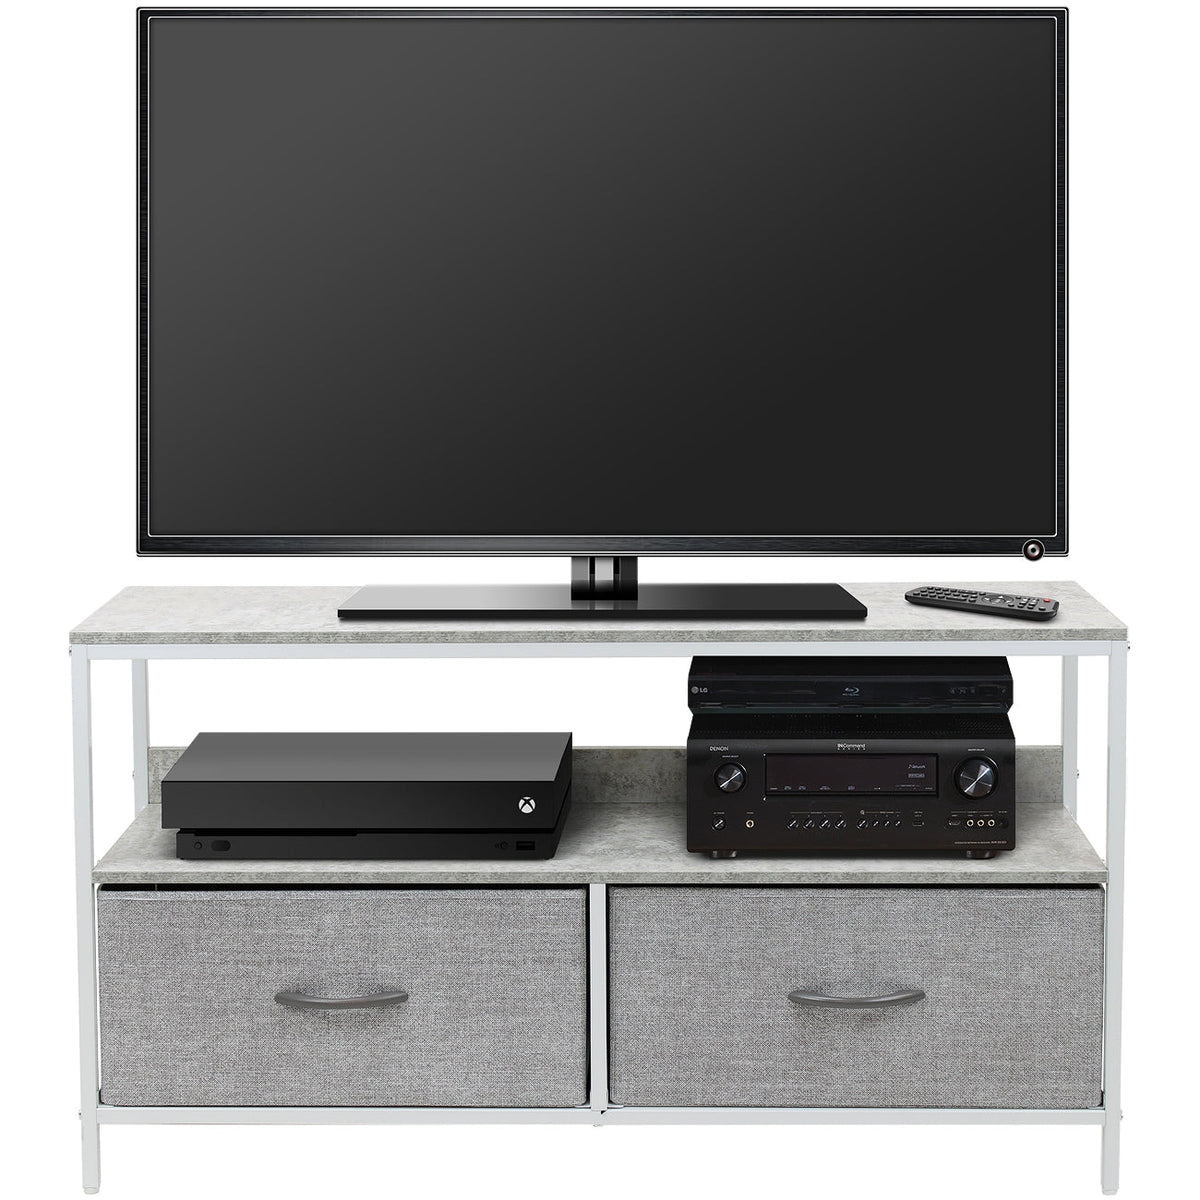 TV Stand Dresser (for TVs up to 38")